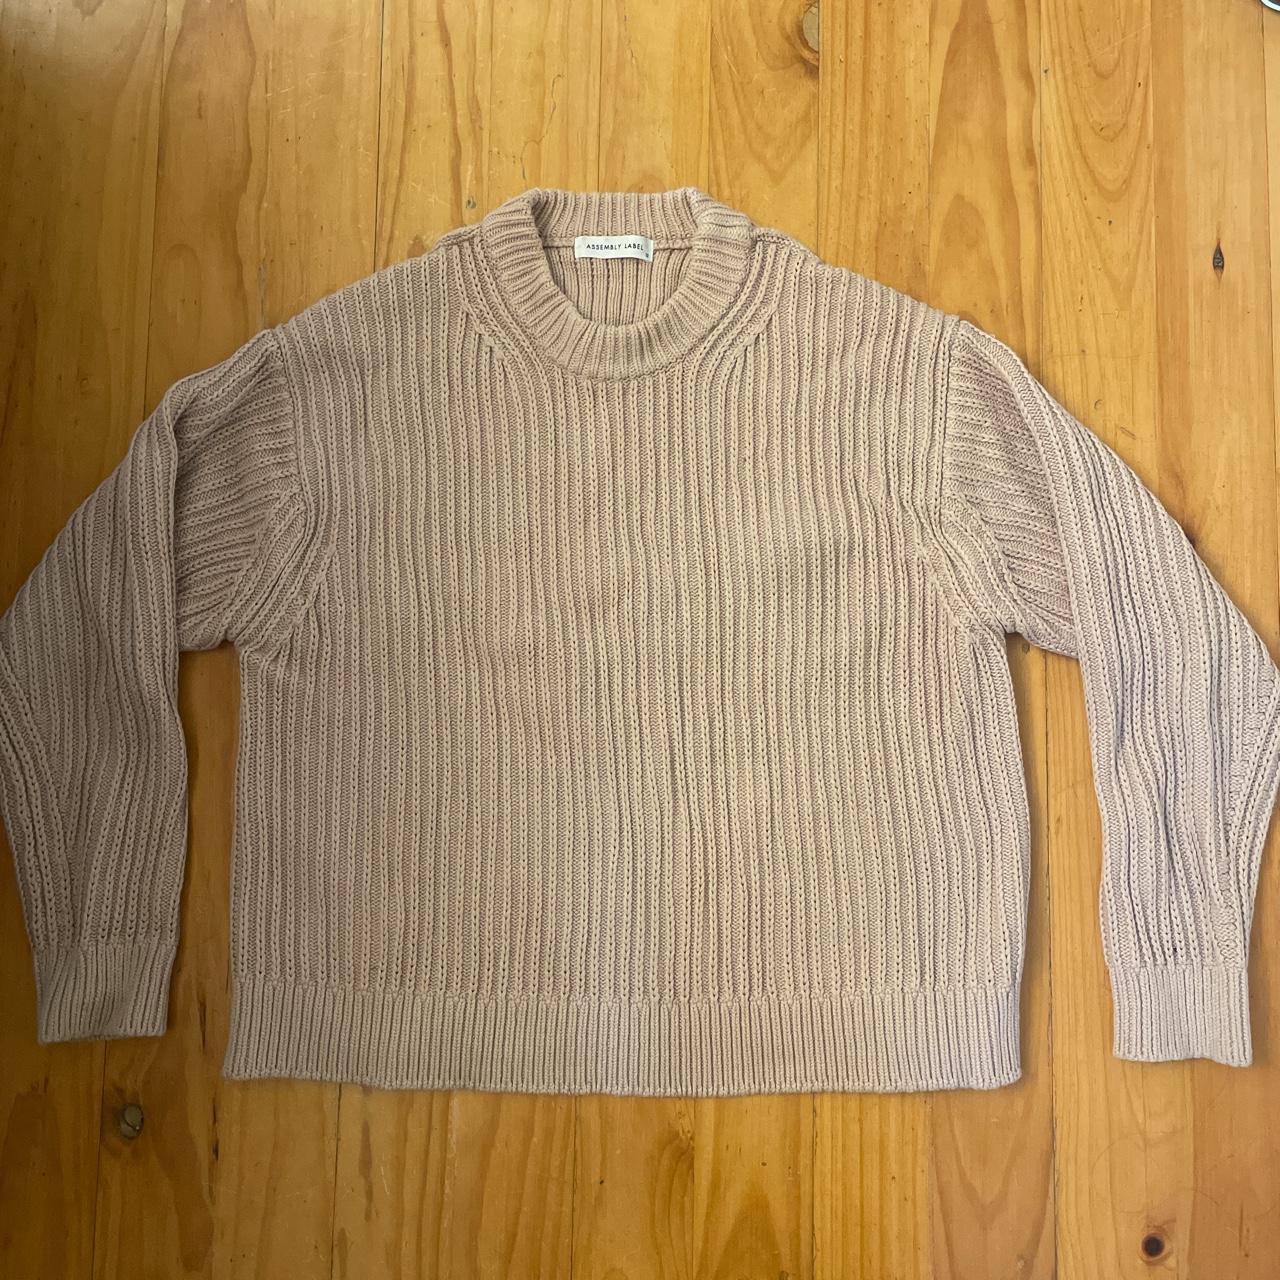 Assembly Label Been worn once Pink knitted jumper - Depop